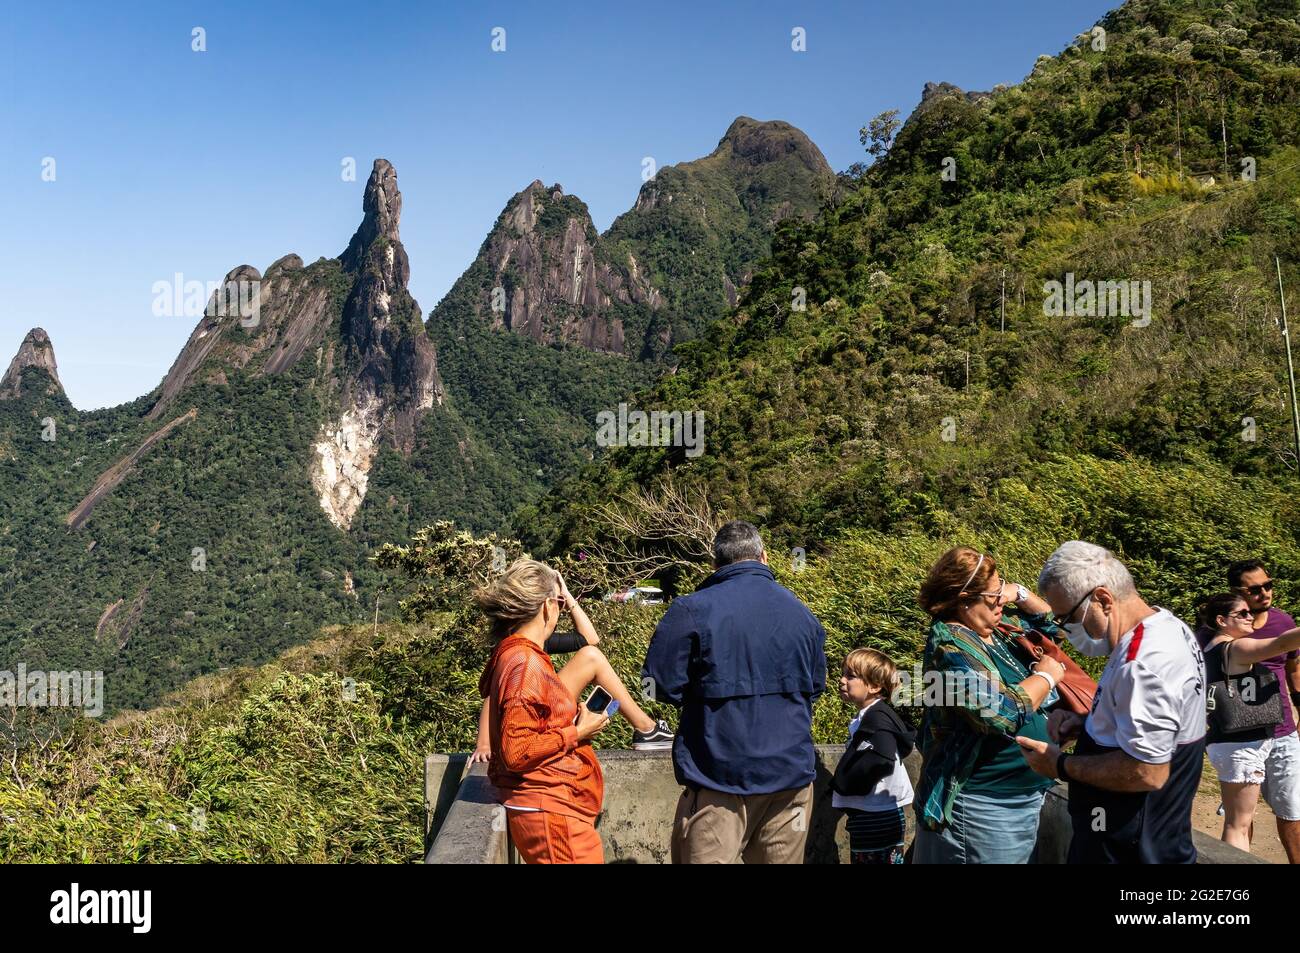 Tourists at Soberbo viewing spot contemplating the view of Our Lady finger, God's Finger and Cabeca de Peixe (Fish Head) peaks in a clear sunny day. Stock Photo